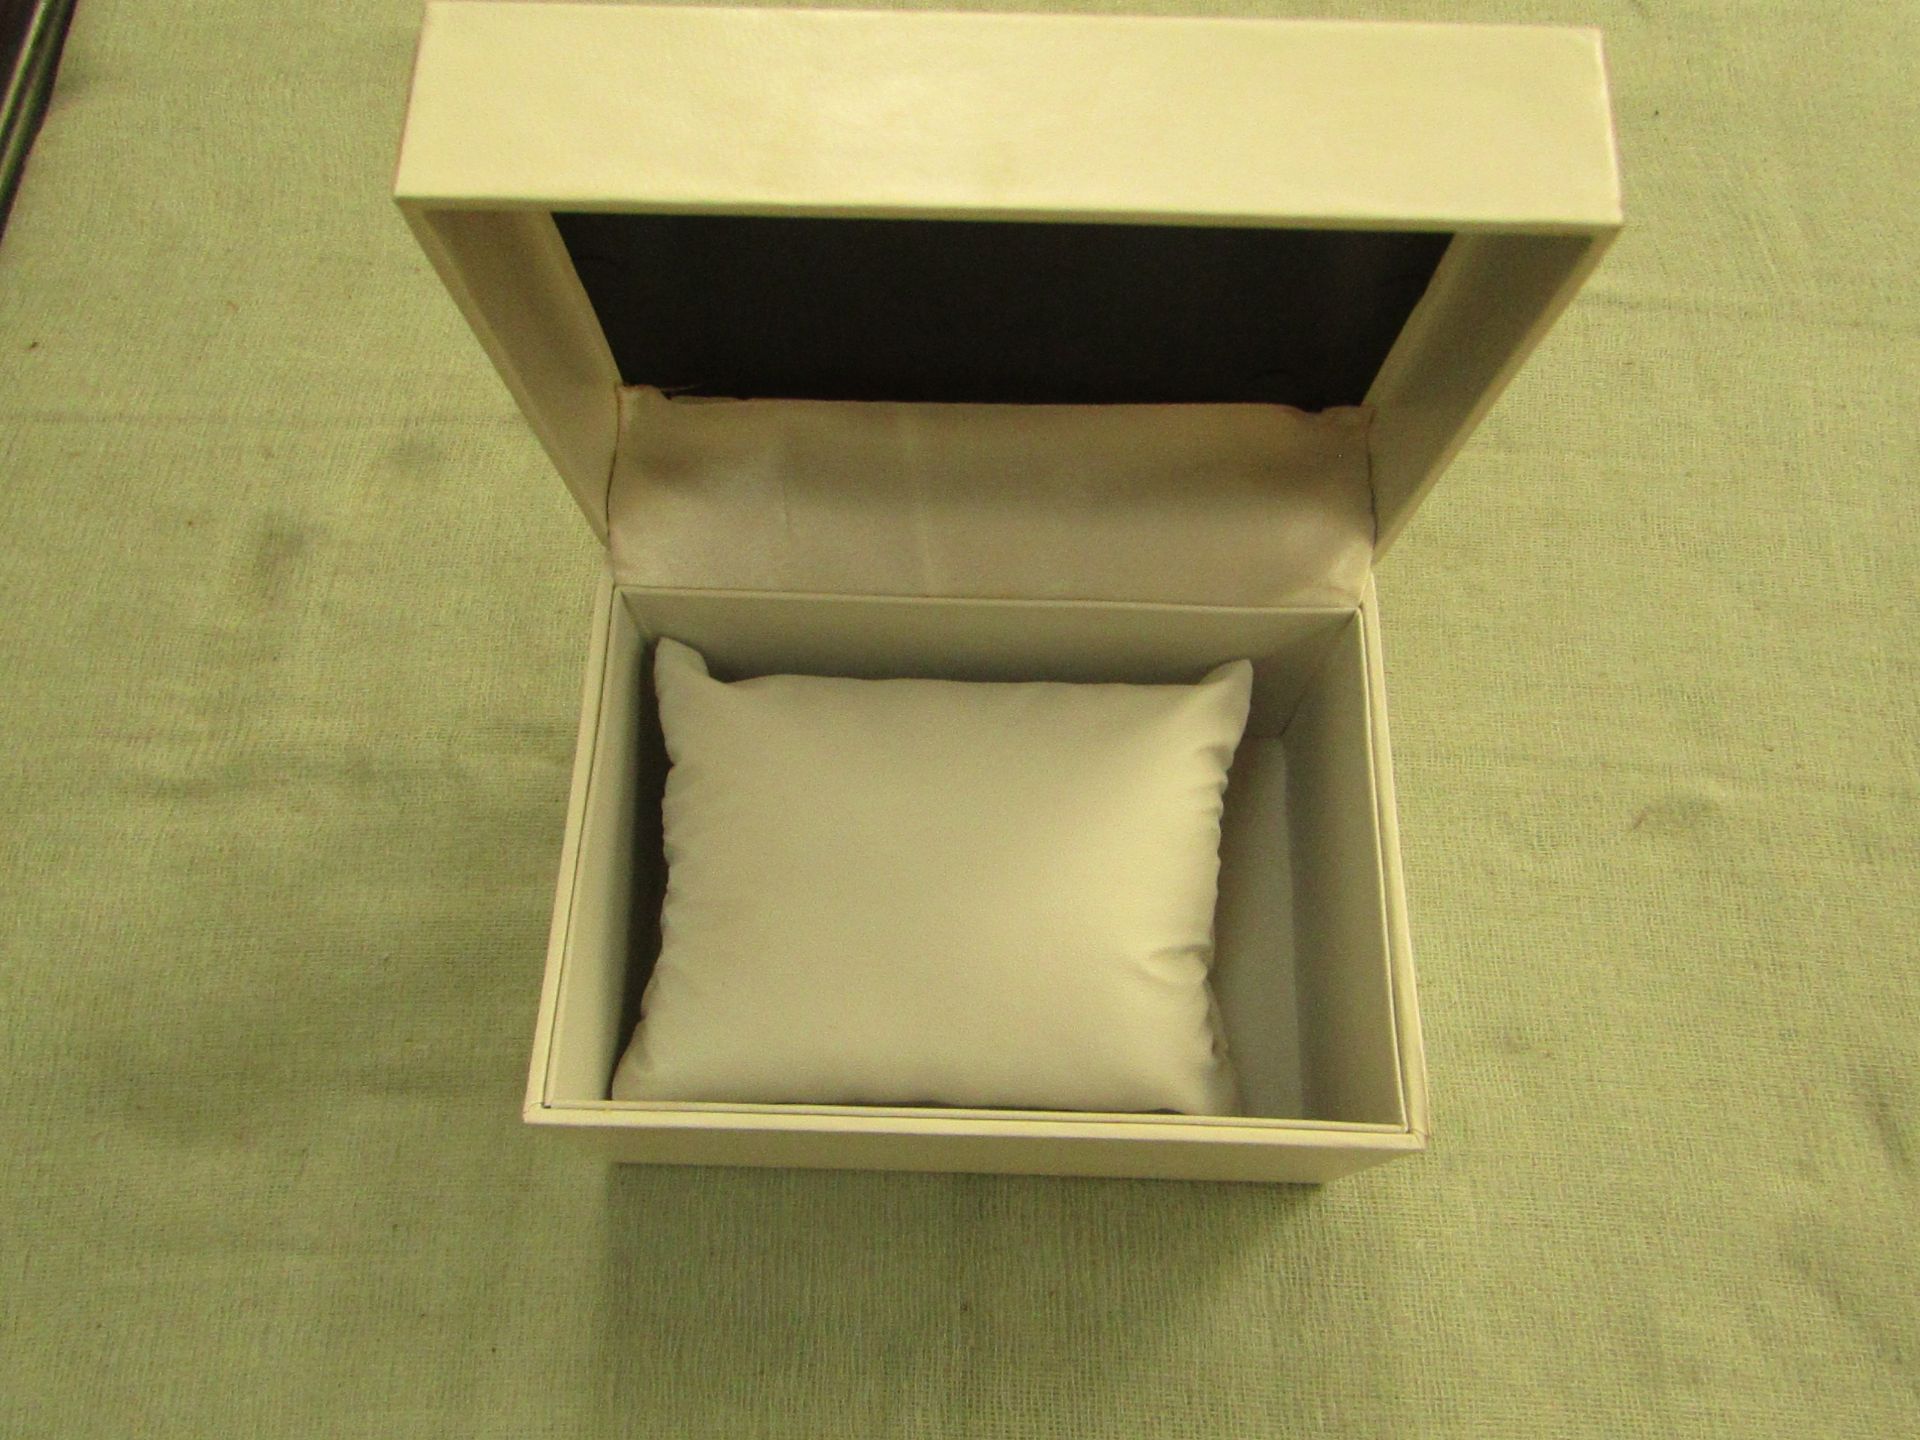 5x Unbranded - White Jewellery / Watch Boxes - All Unused.